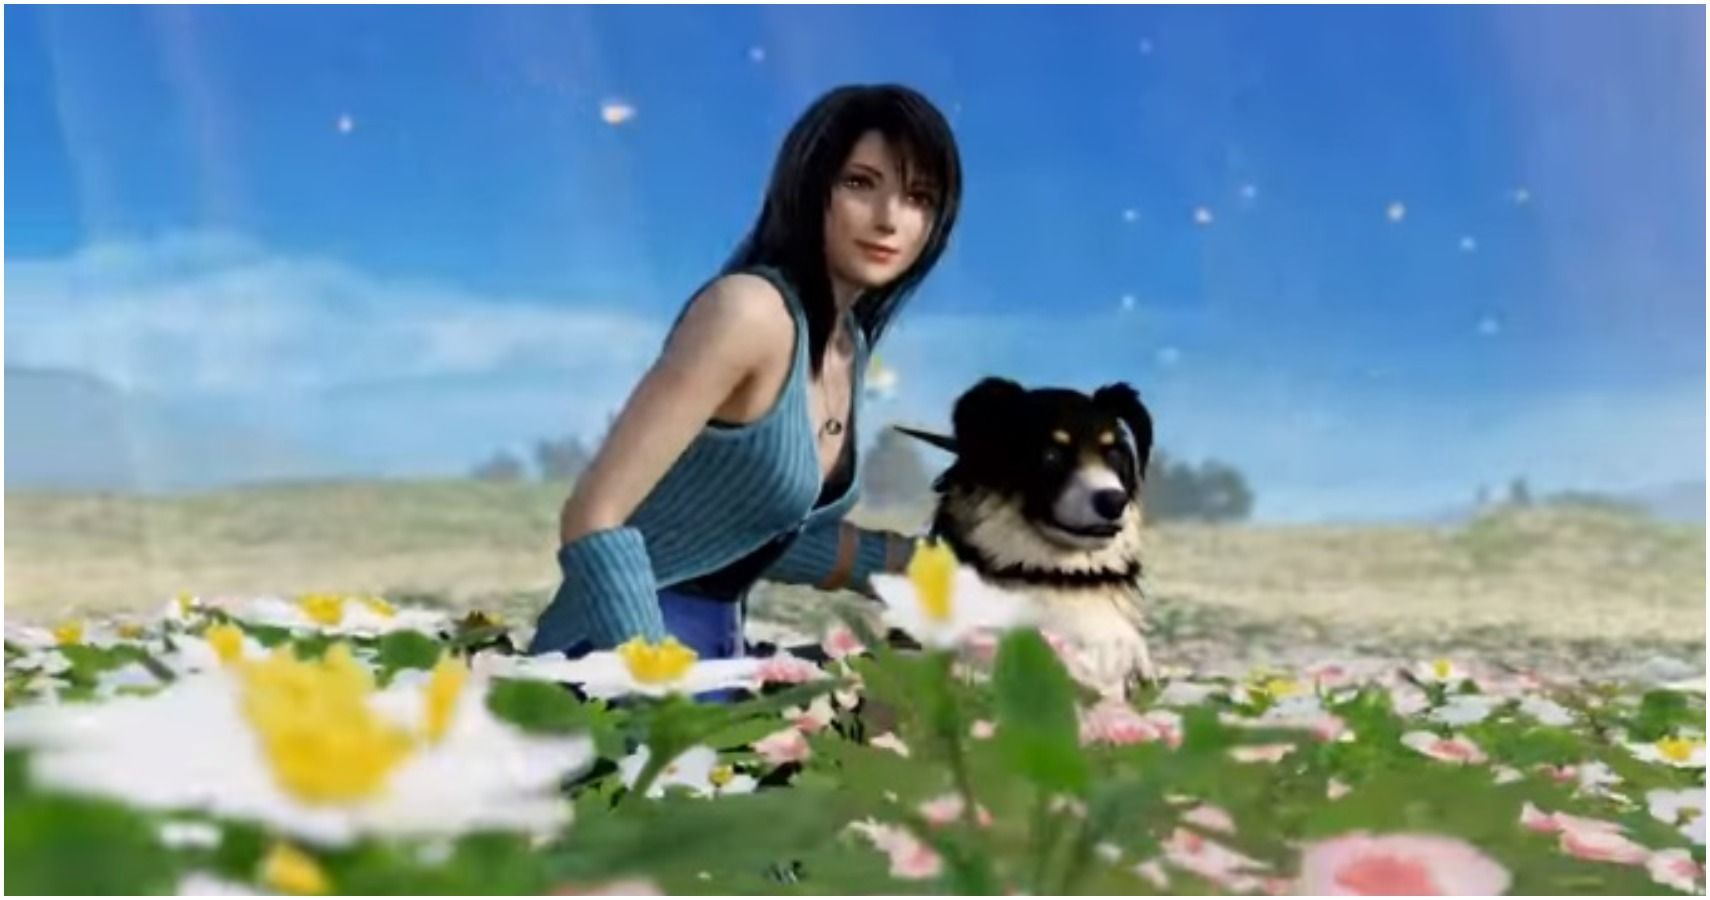 Rinoa From Final Fantasy VIII Is Coming To Dissidia NT